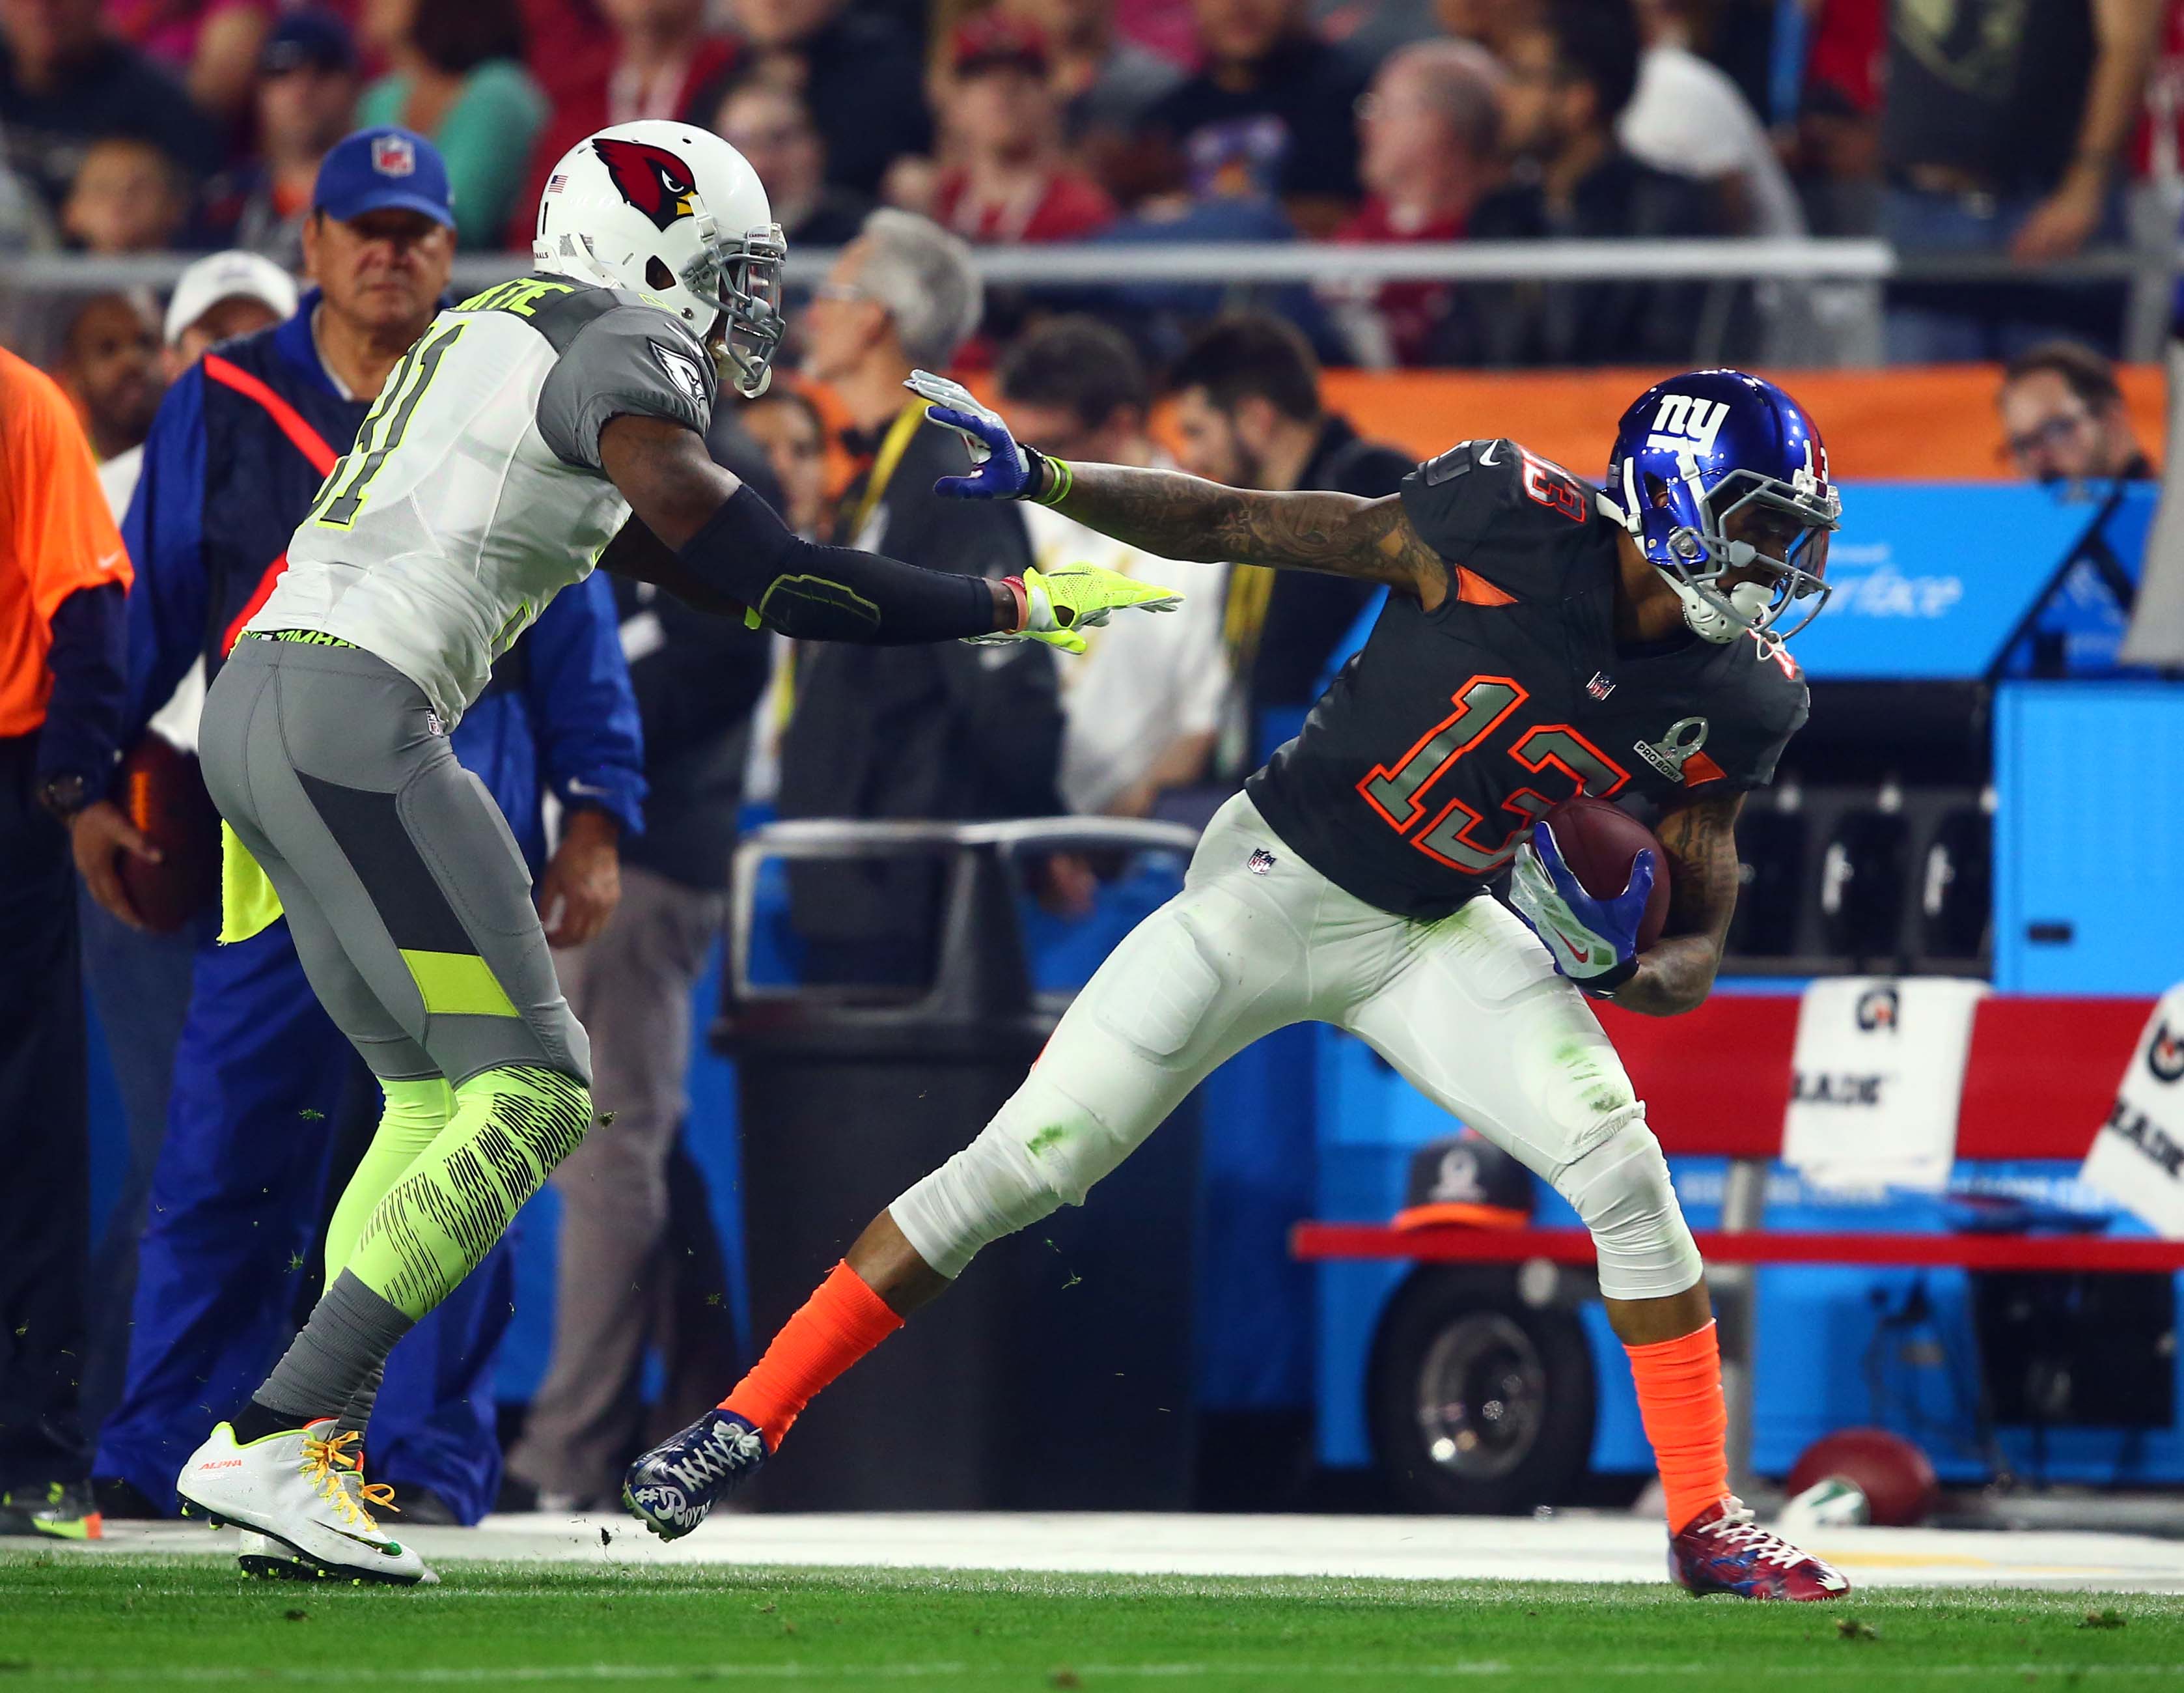 Video: Former LSU wideout Odell Beckham Jr. shows off at the Pro Bowl